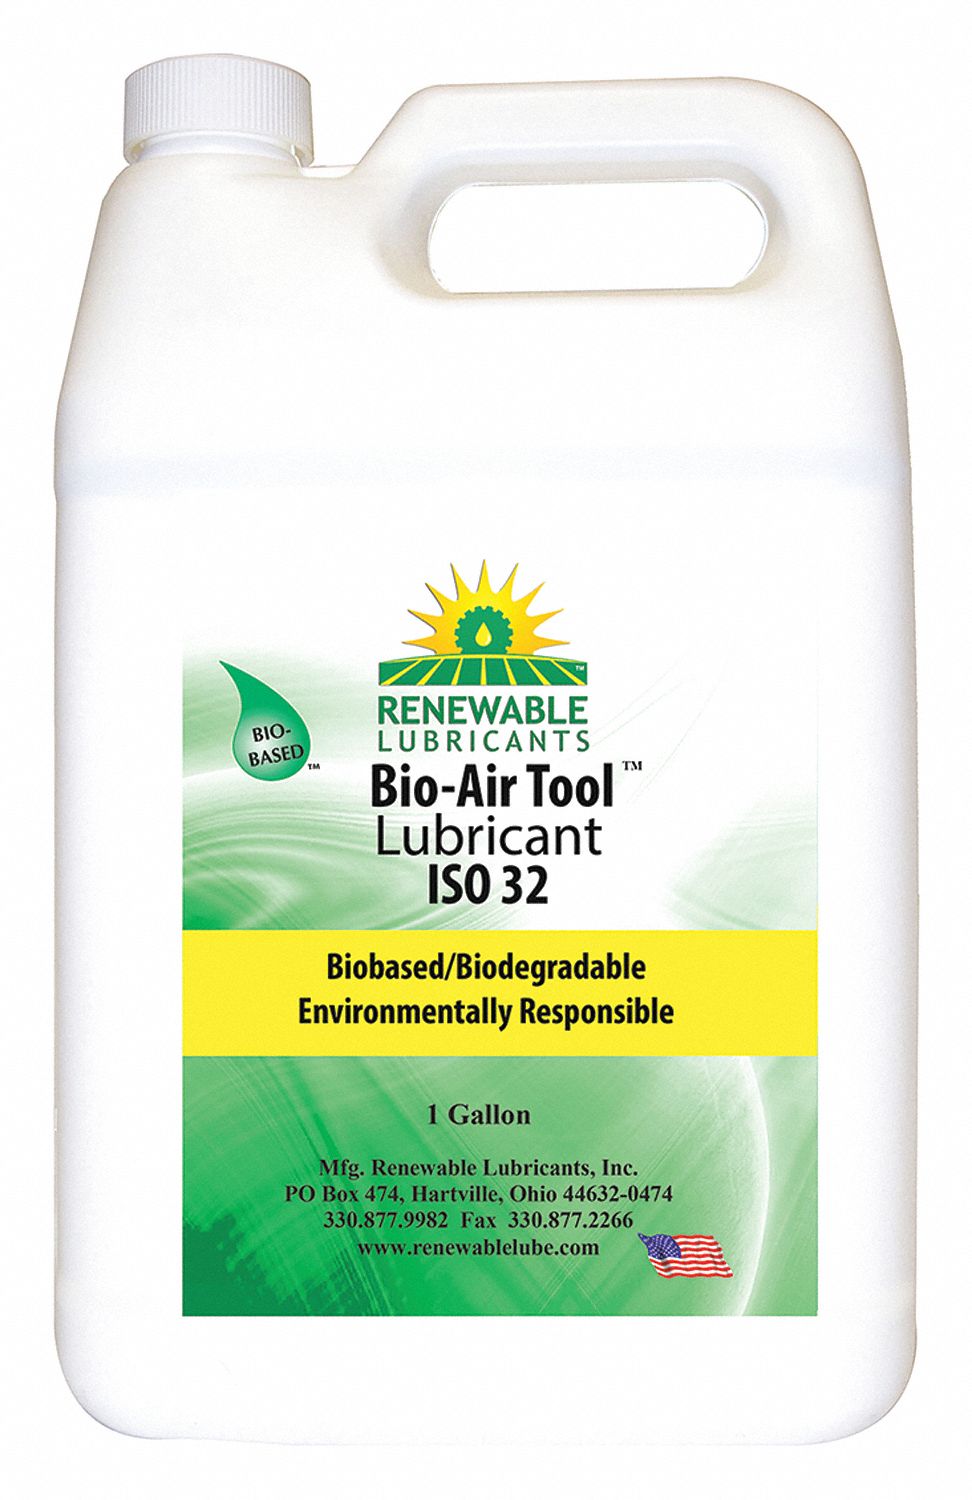 2NMW6 - Air Tool Lube ISO 32 Biodegradable Gal